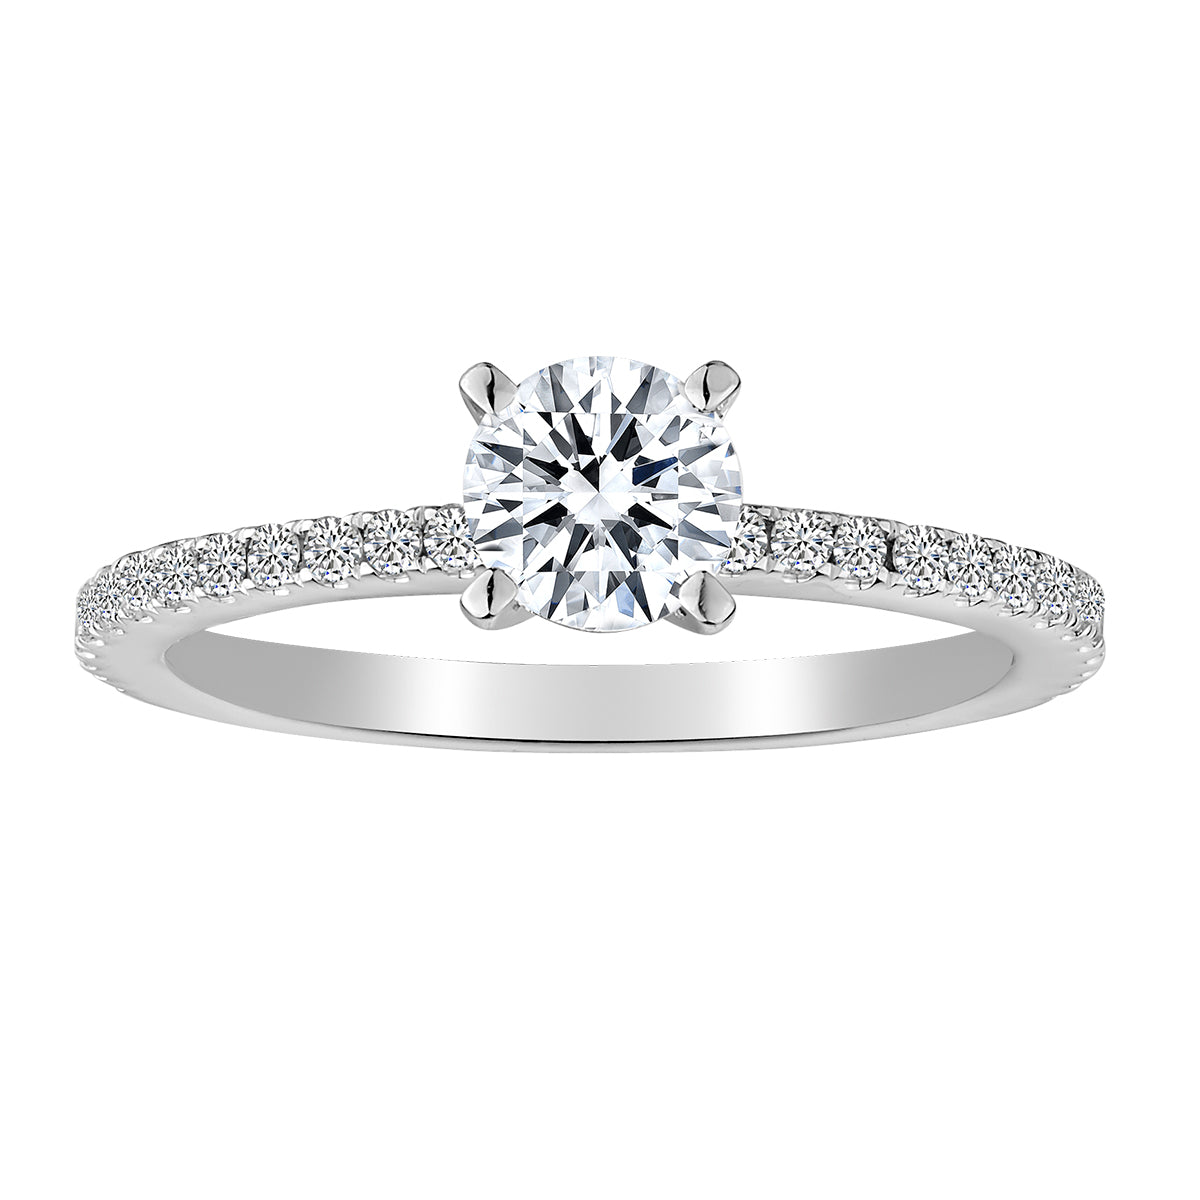 1.00 TOTAL DIAMOND WEIGHT, DIAMOND ENGAGEMENT RING, 14kt WHITE GOLD…....................NOW